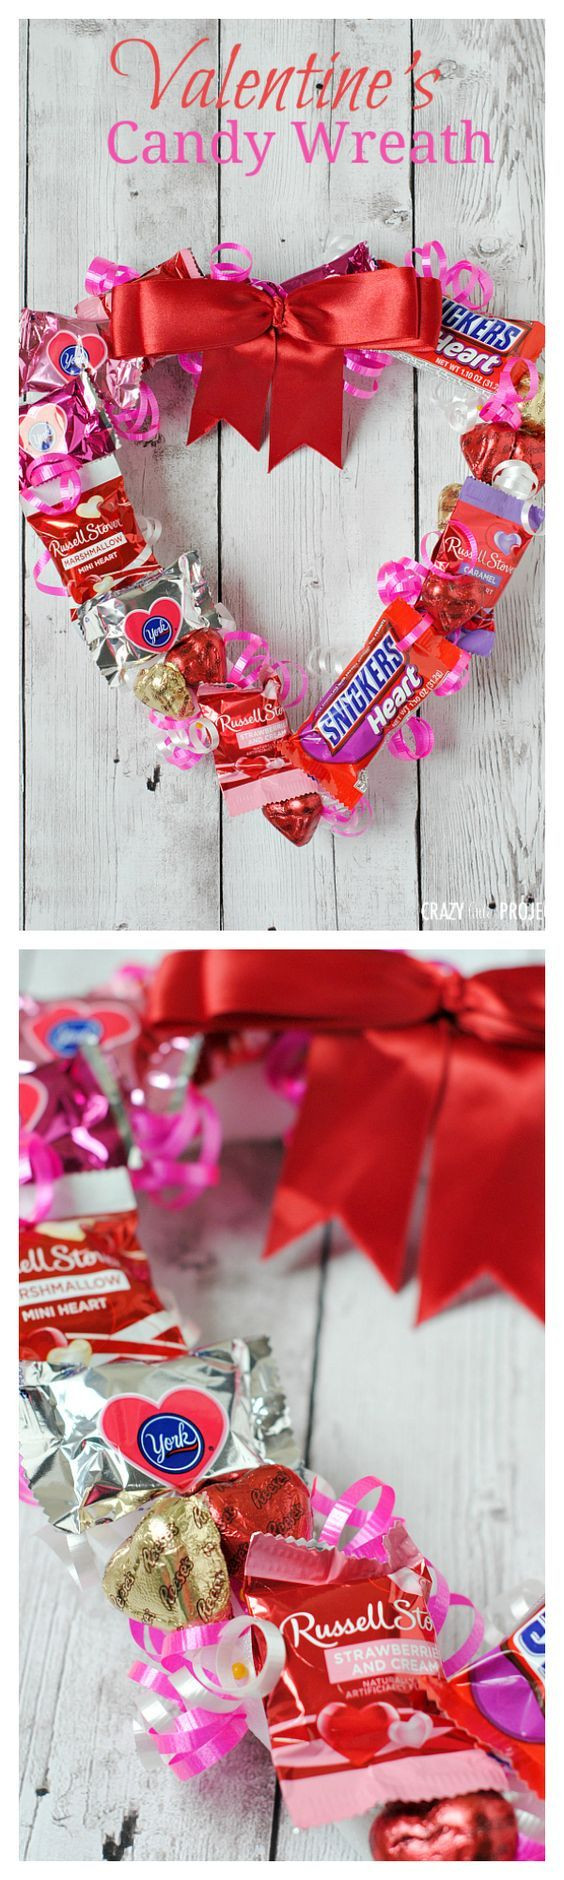 Valentines Day Photo Gift Ideas
 Valentine s Wreath Made From Candy